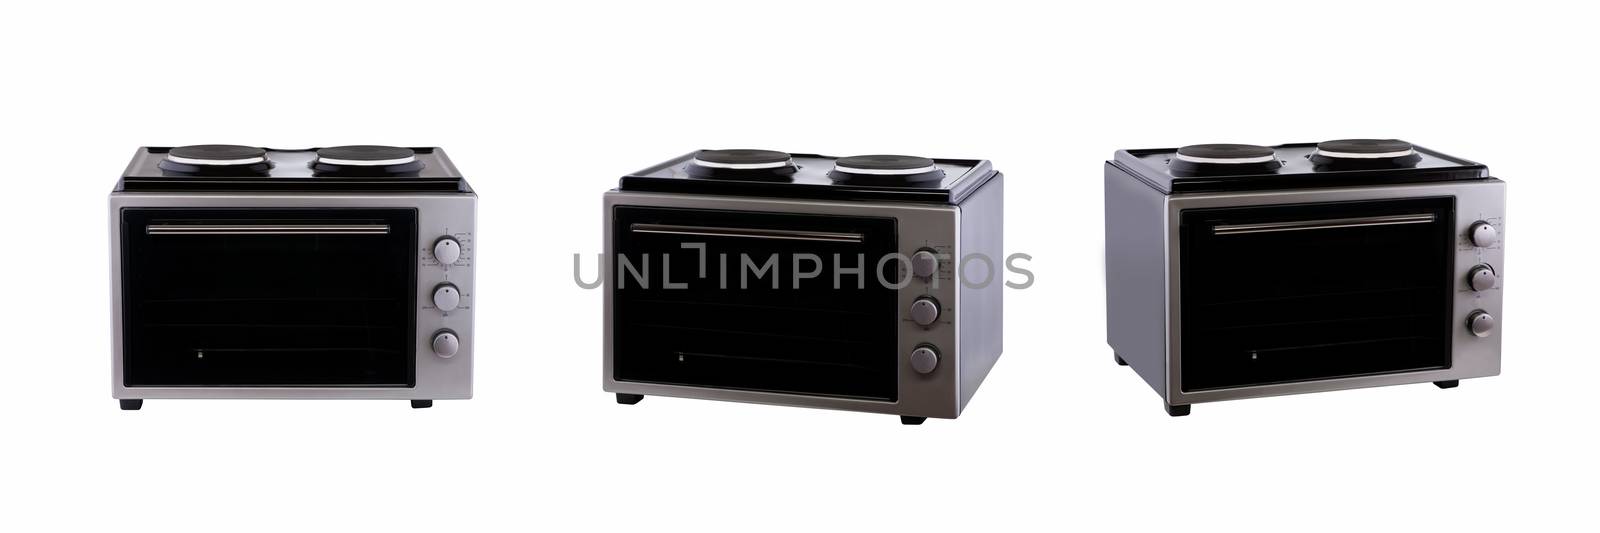 three positions review electric home furnace on a white background